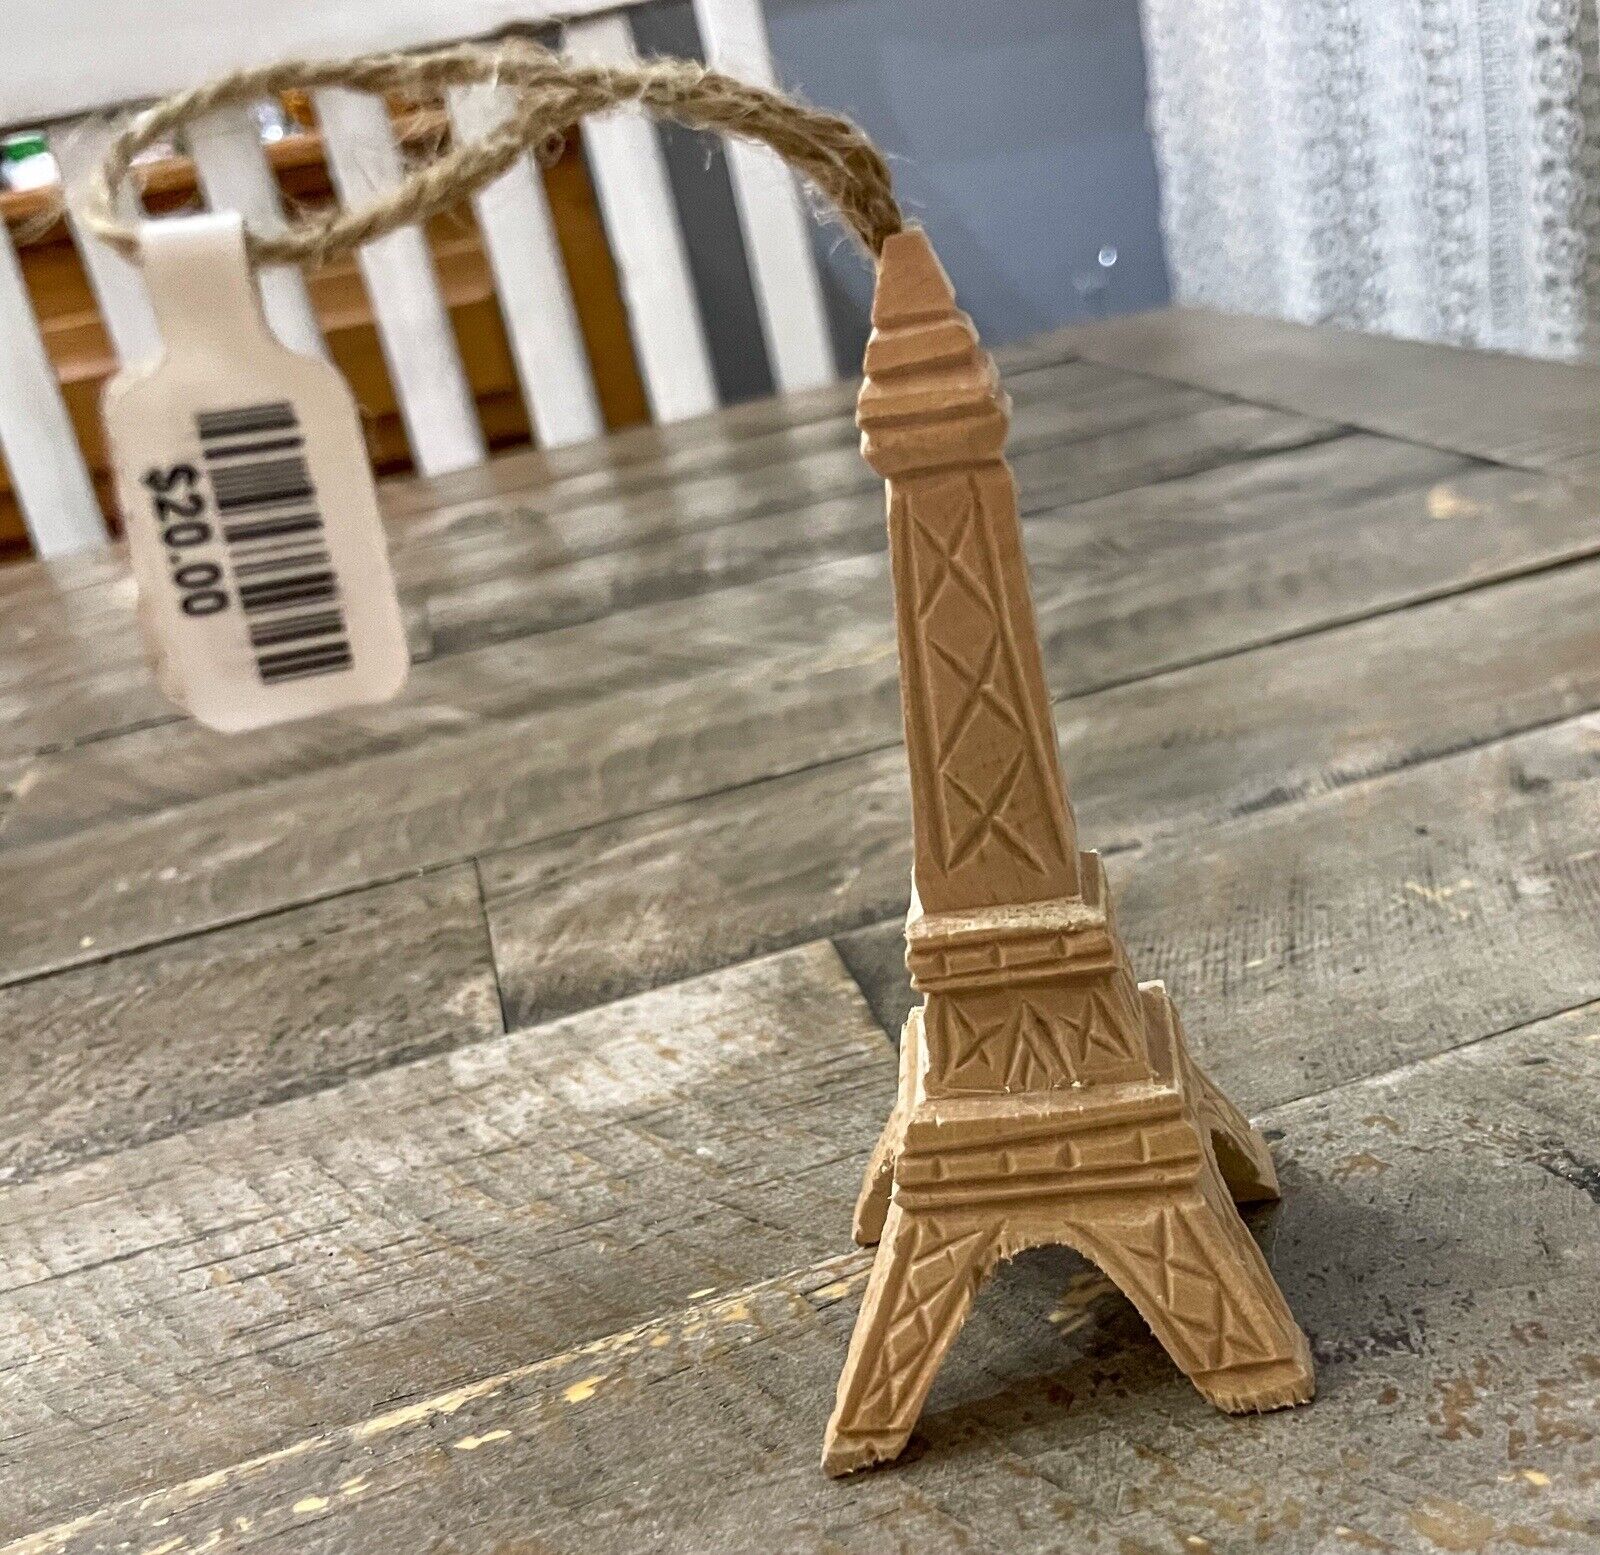 Anthropologie Eiffel Tower Ornament Hand Carved Balsa Wood New With Tag